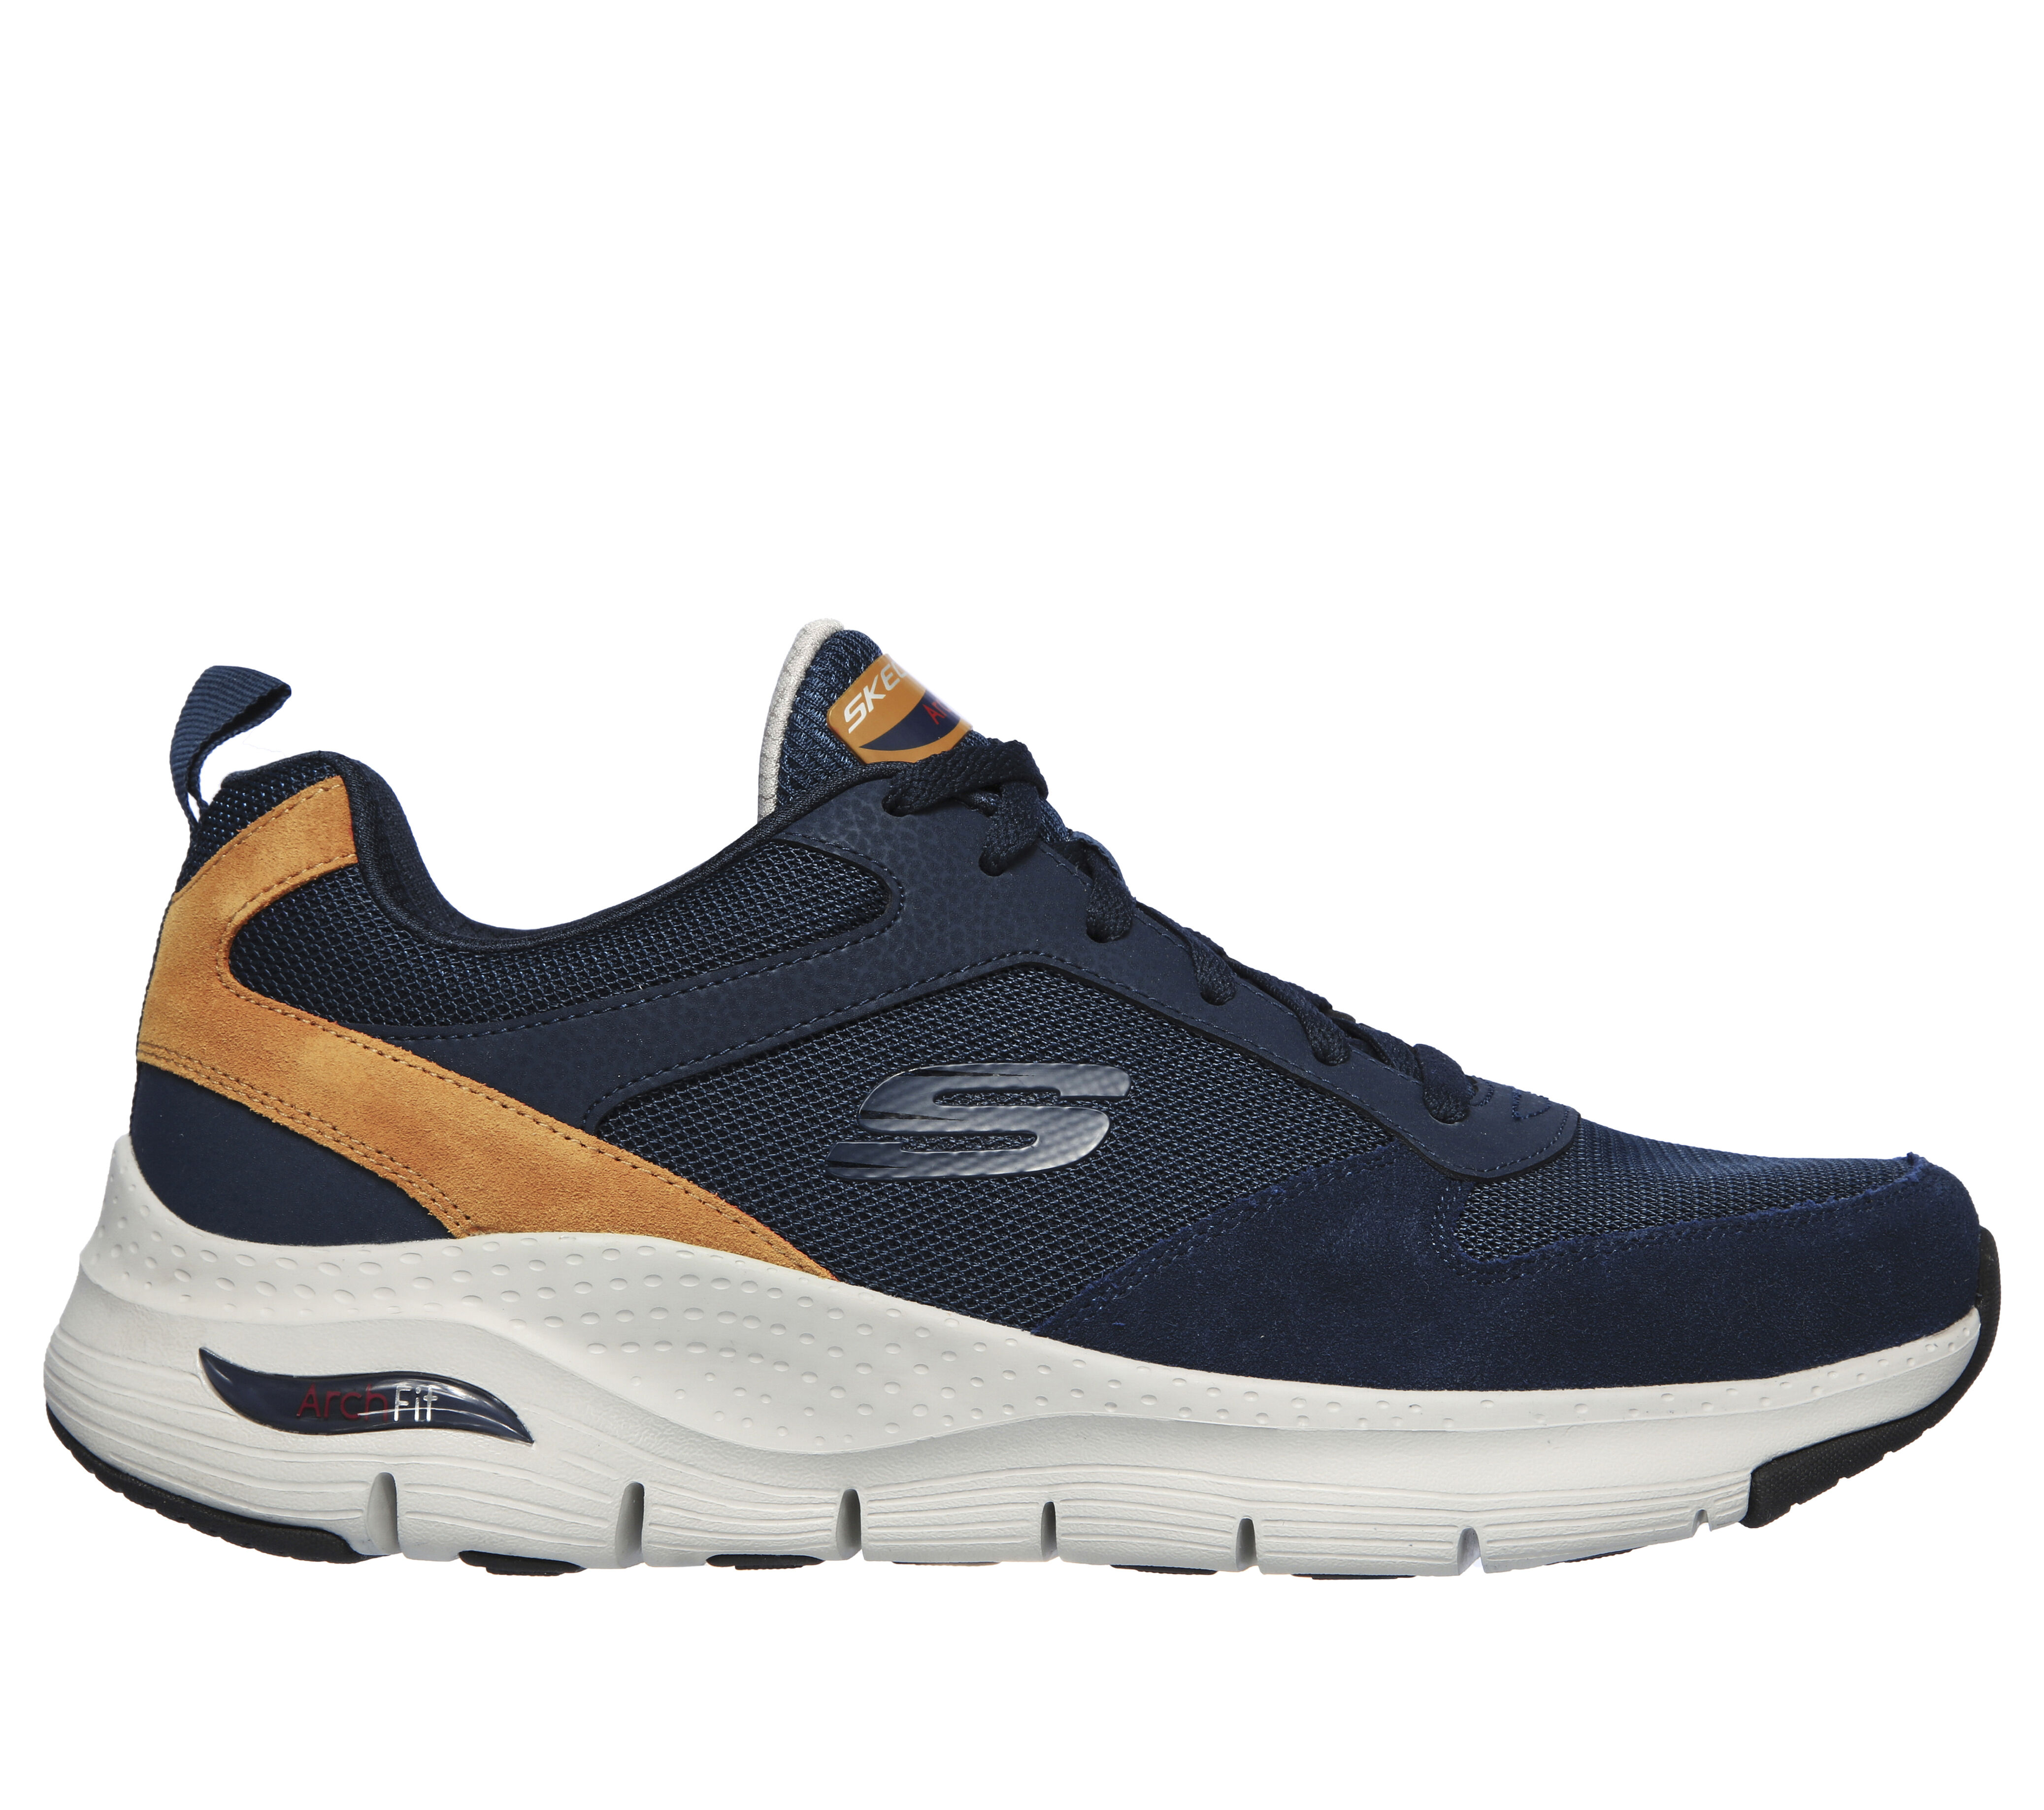 skechers mens gym shoes